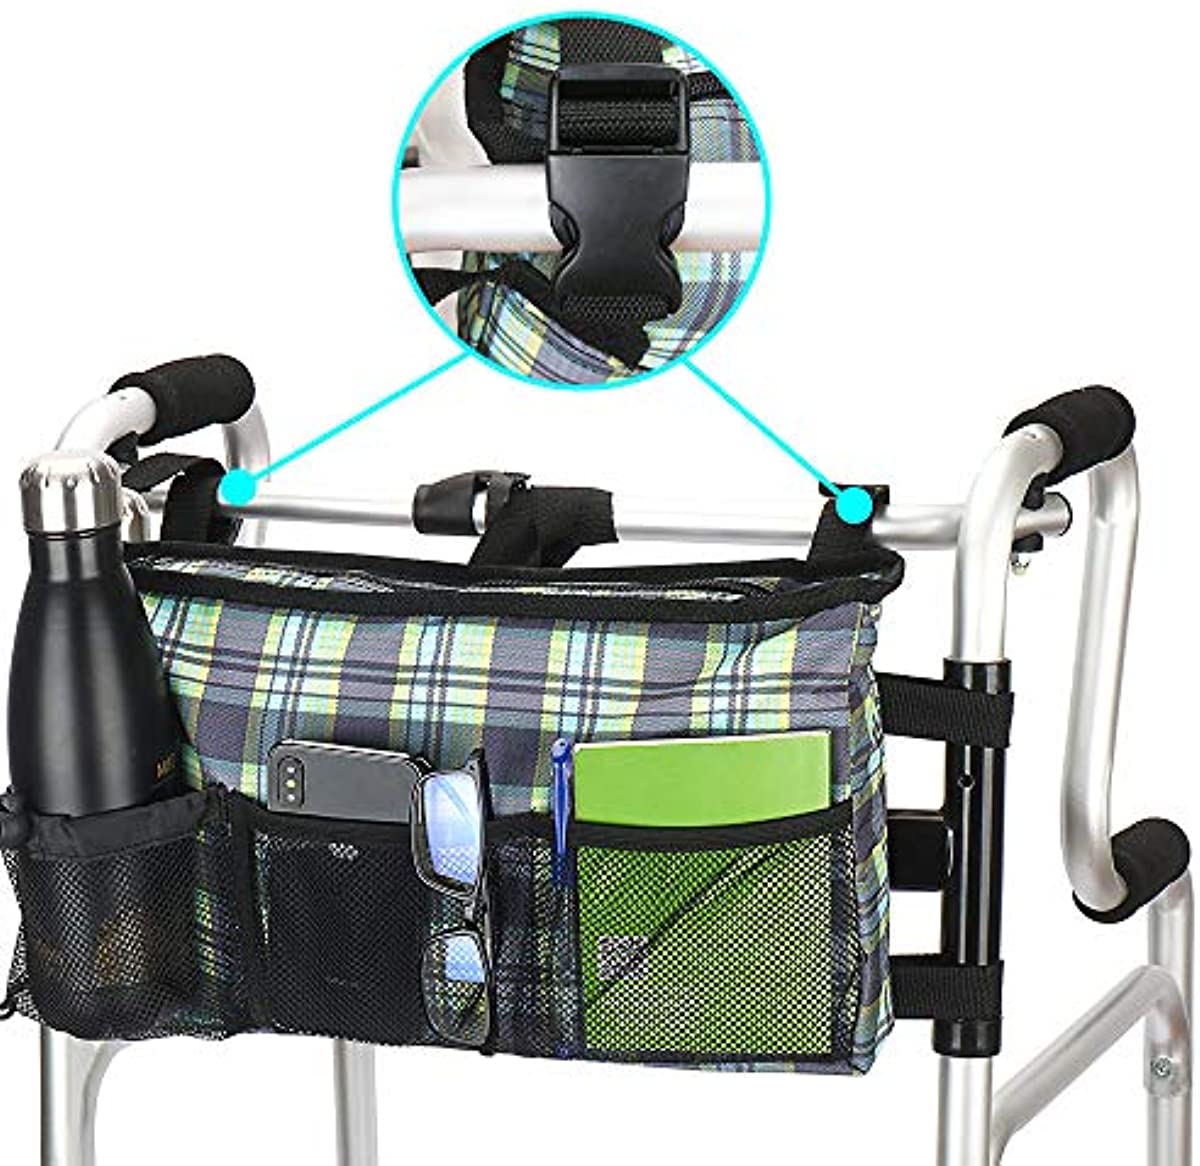 Walker Bag - Water Resistant Pouch Basket Tote Walker Organizer with 6 Pockets for Rollator and Folding Walker, Wheelchairs,Bariatric Walkers (Plaid Blue)